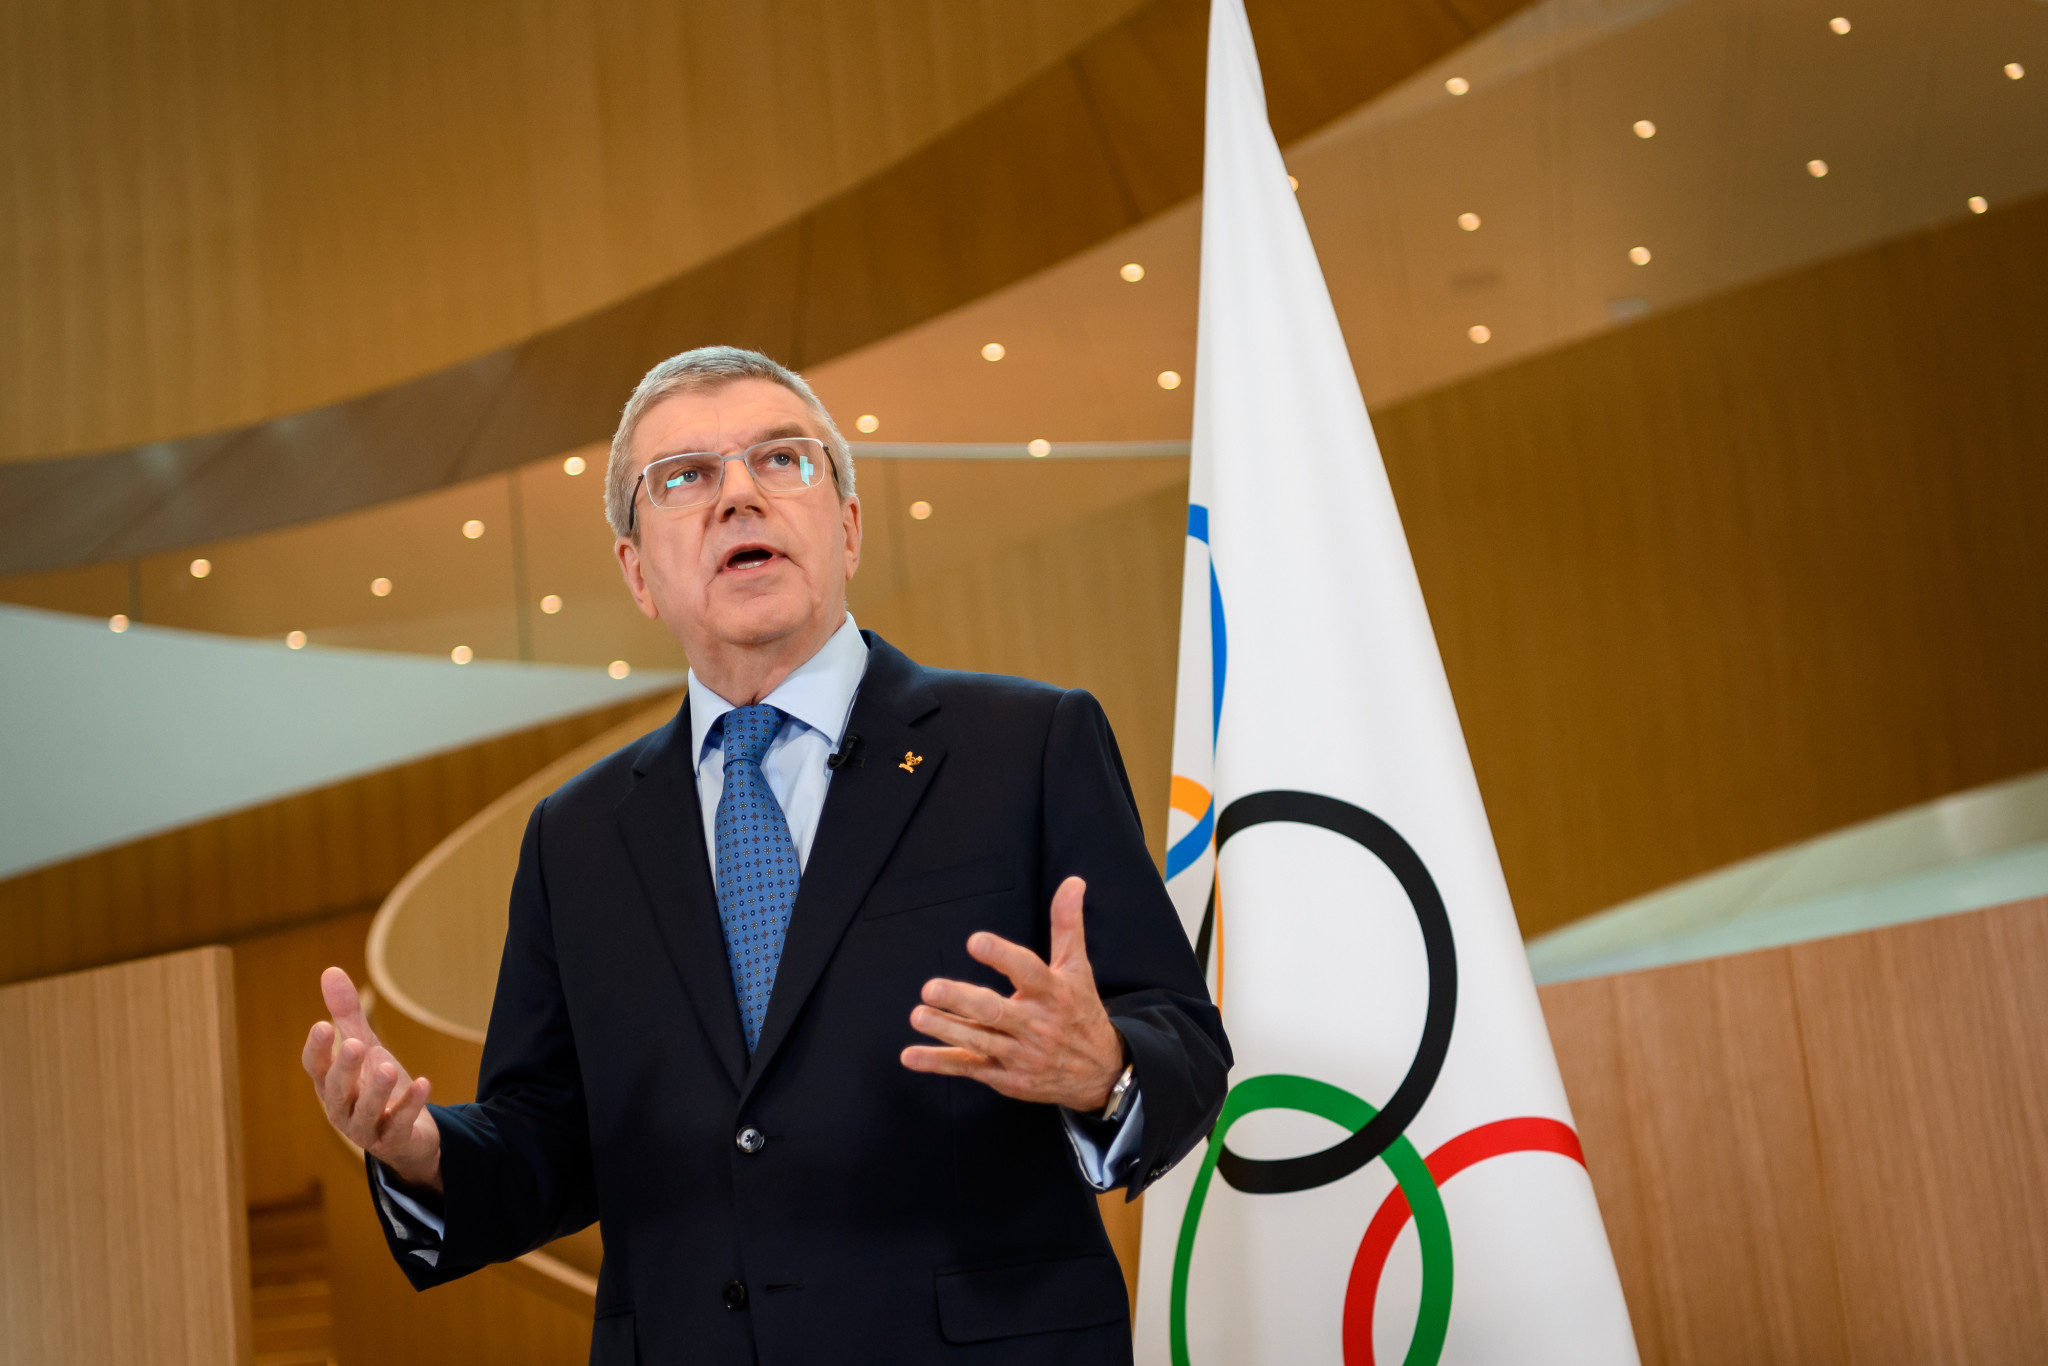 Thomas Bach said the IOC has "great concerns" over weightlifting's new anti-doping rules ©Getty Images